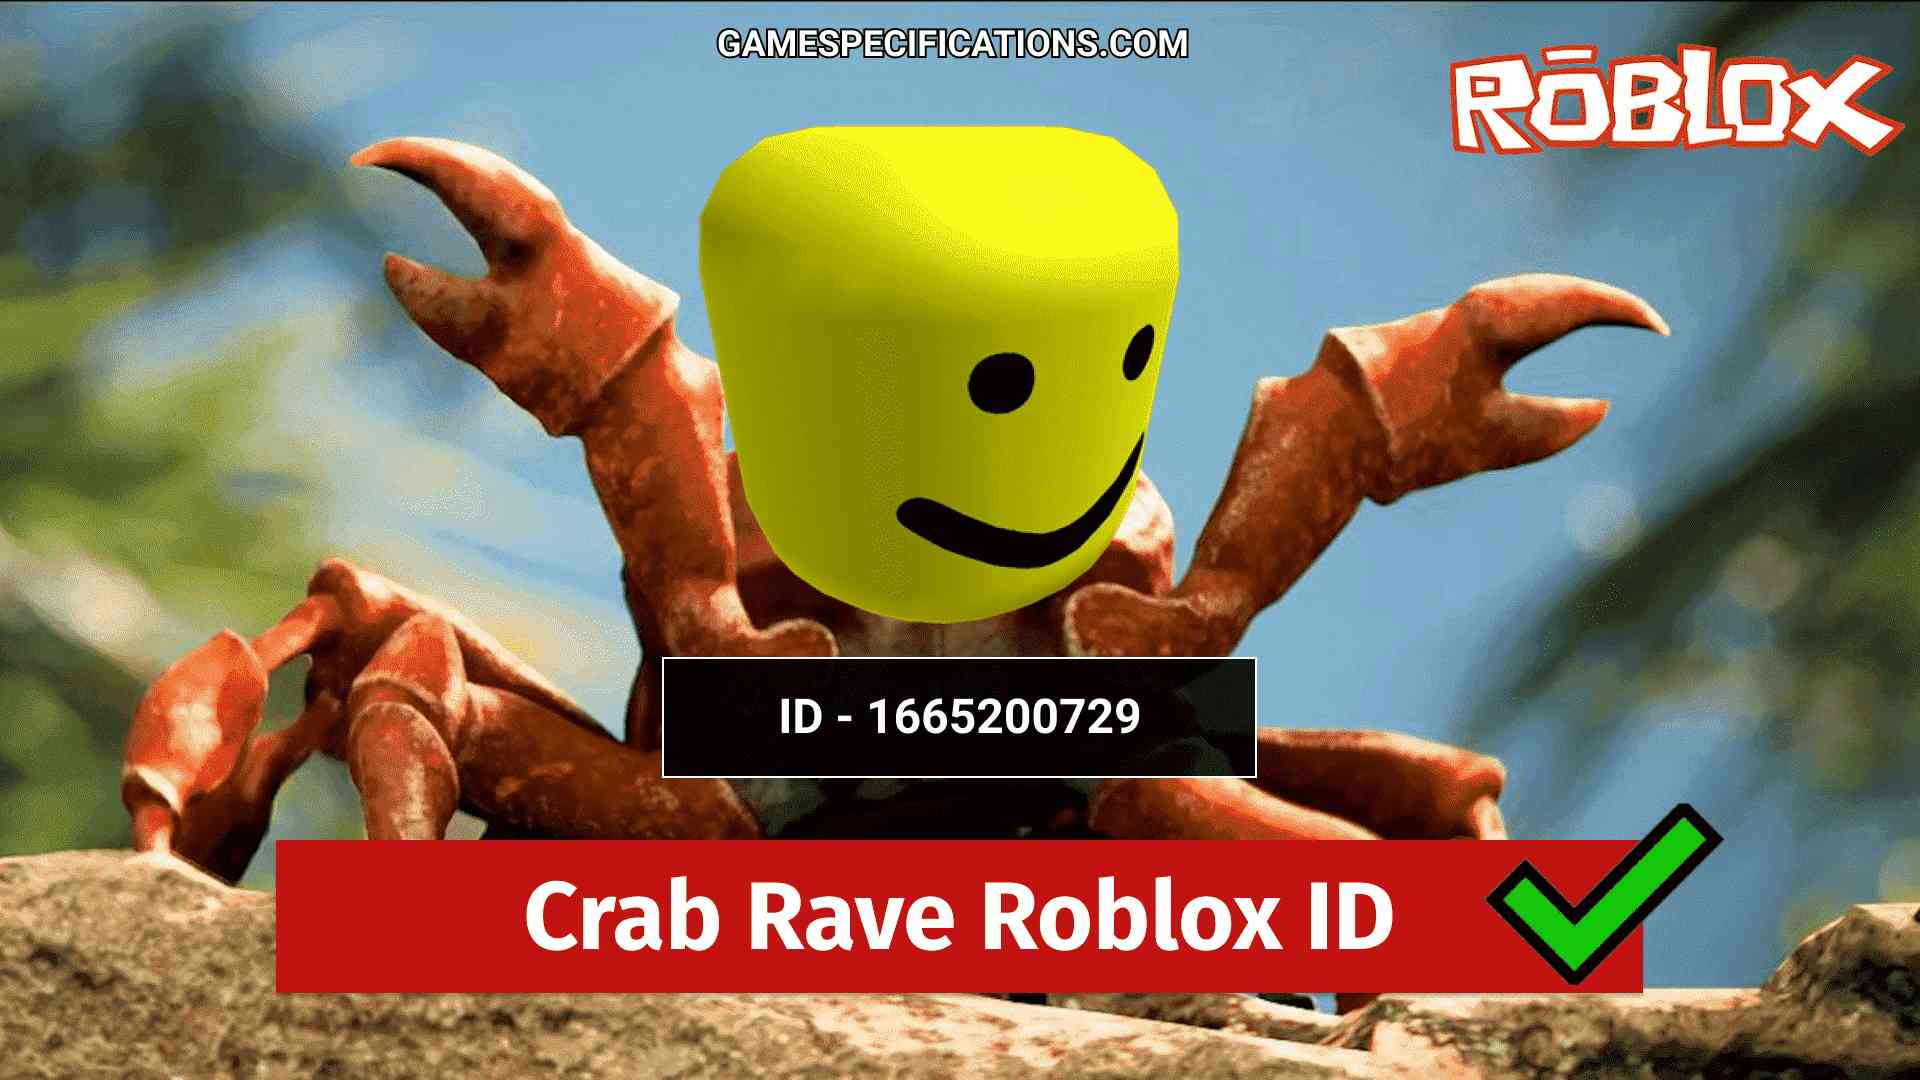 10 Best Crab Rave Roblox Id Codes Parody Remix Included Game Specifications - roblox megaovani load